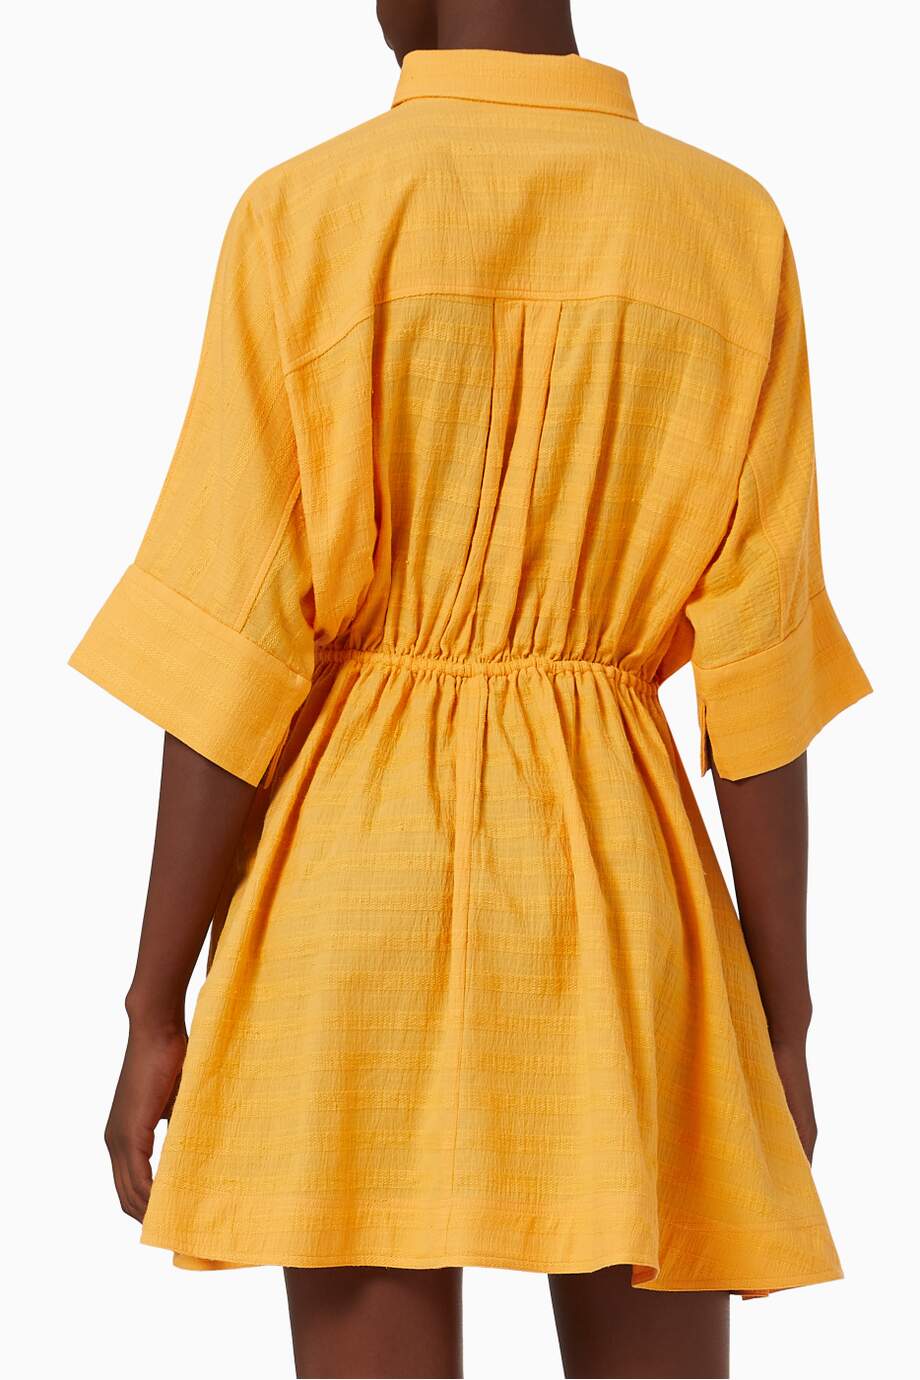 SIGNIFICANT OTHER WILLOW MINI DRESS - AMBER